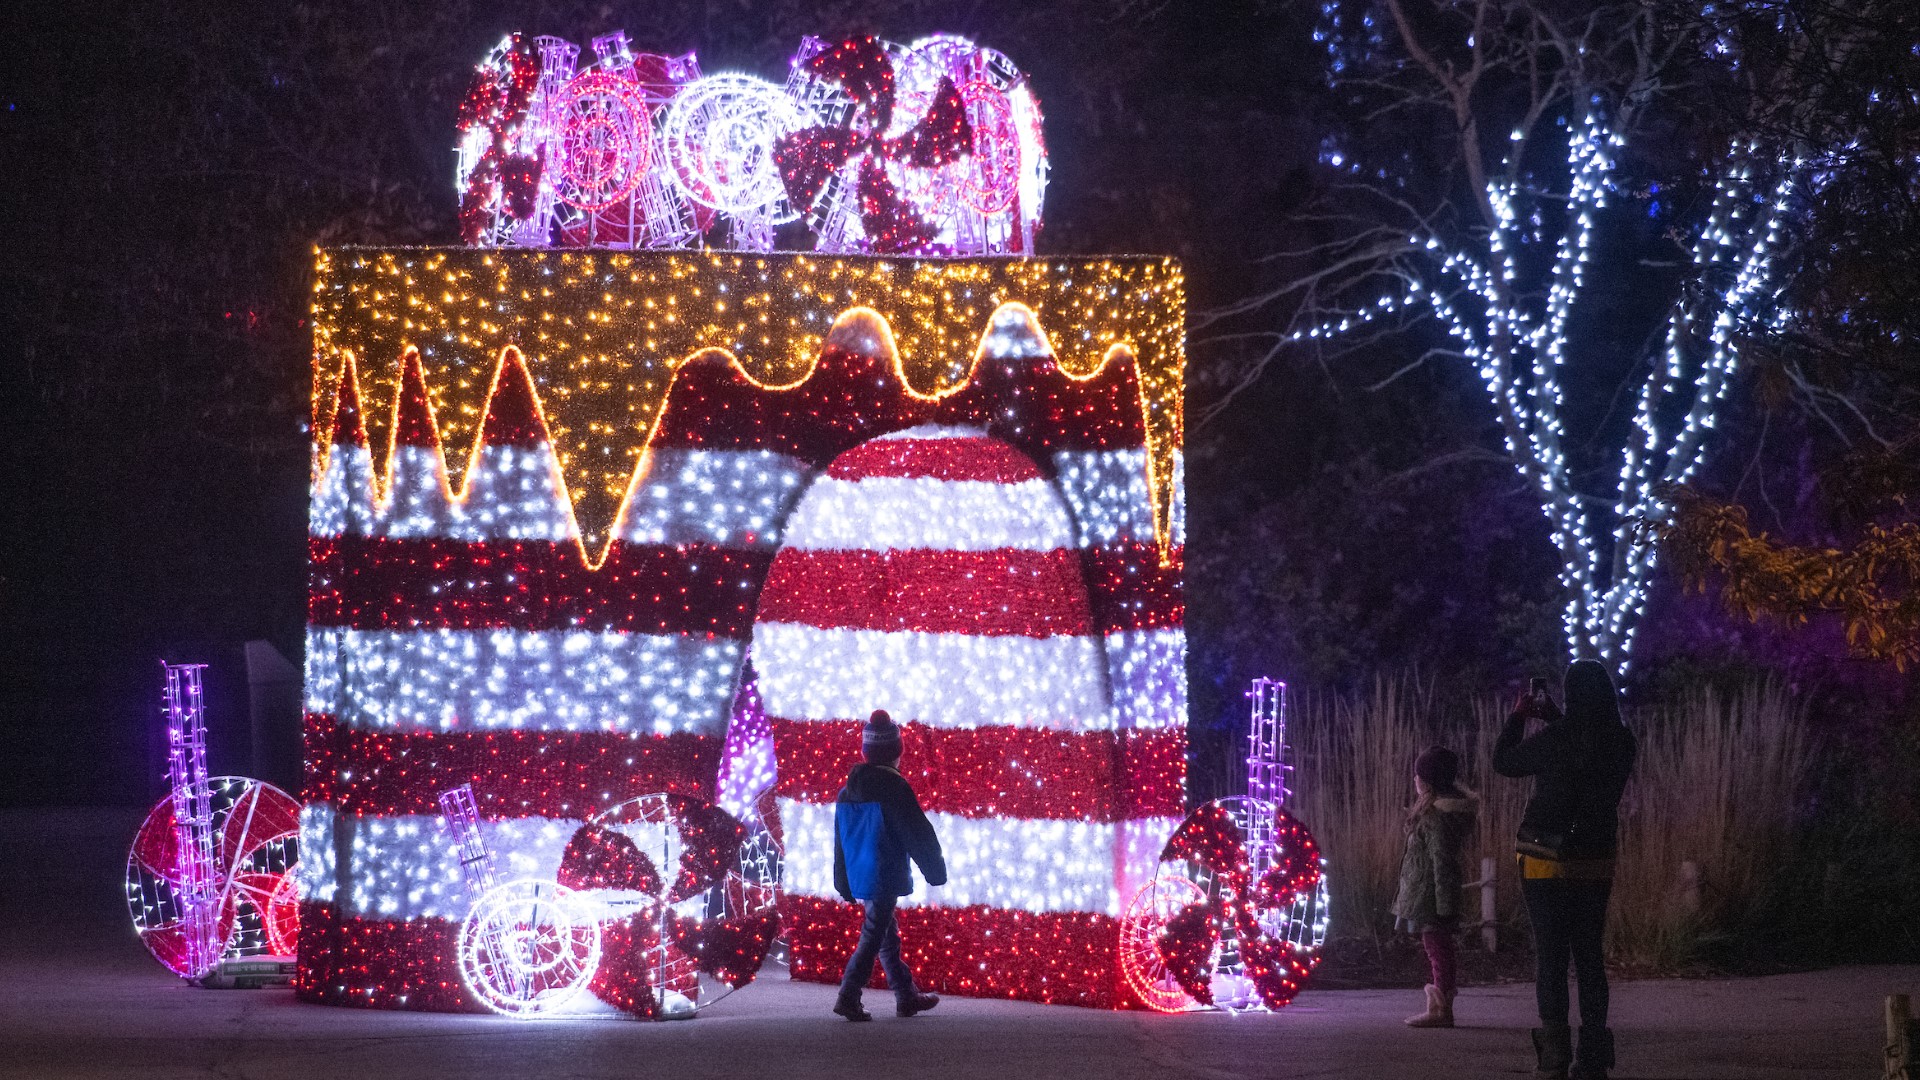 Wild Winter Lights includes more than 1.5 million lights across holiday-themed areas throughout the zoo.